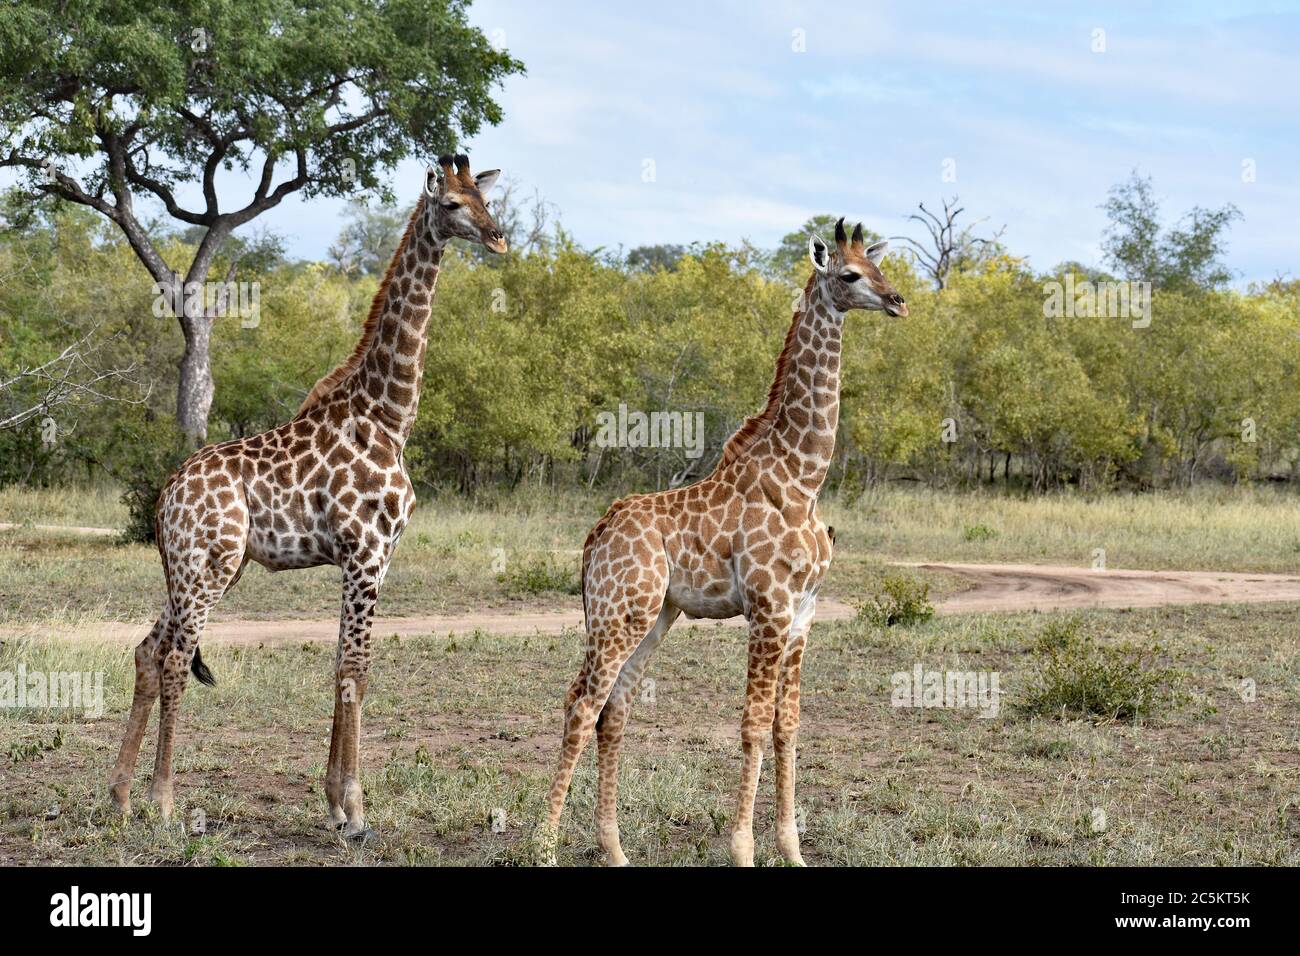 Two Giraffes (Giraffa) paused while walking across the savannah with trees in the background in Sabi Sands Game Reserve, Greater Kruger, South Africa. Stock Photo